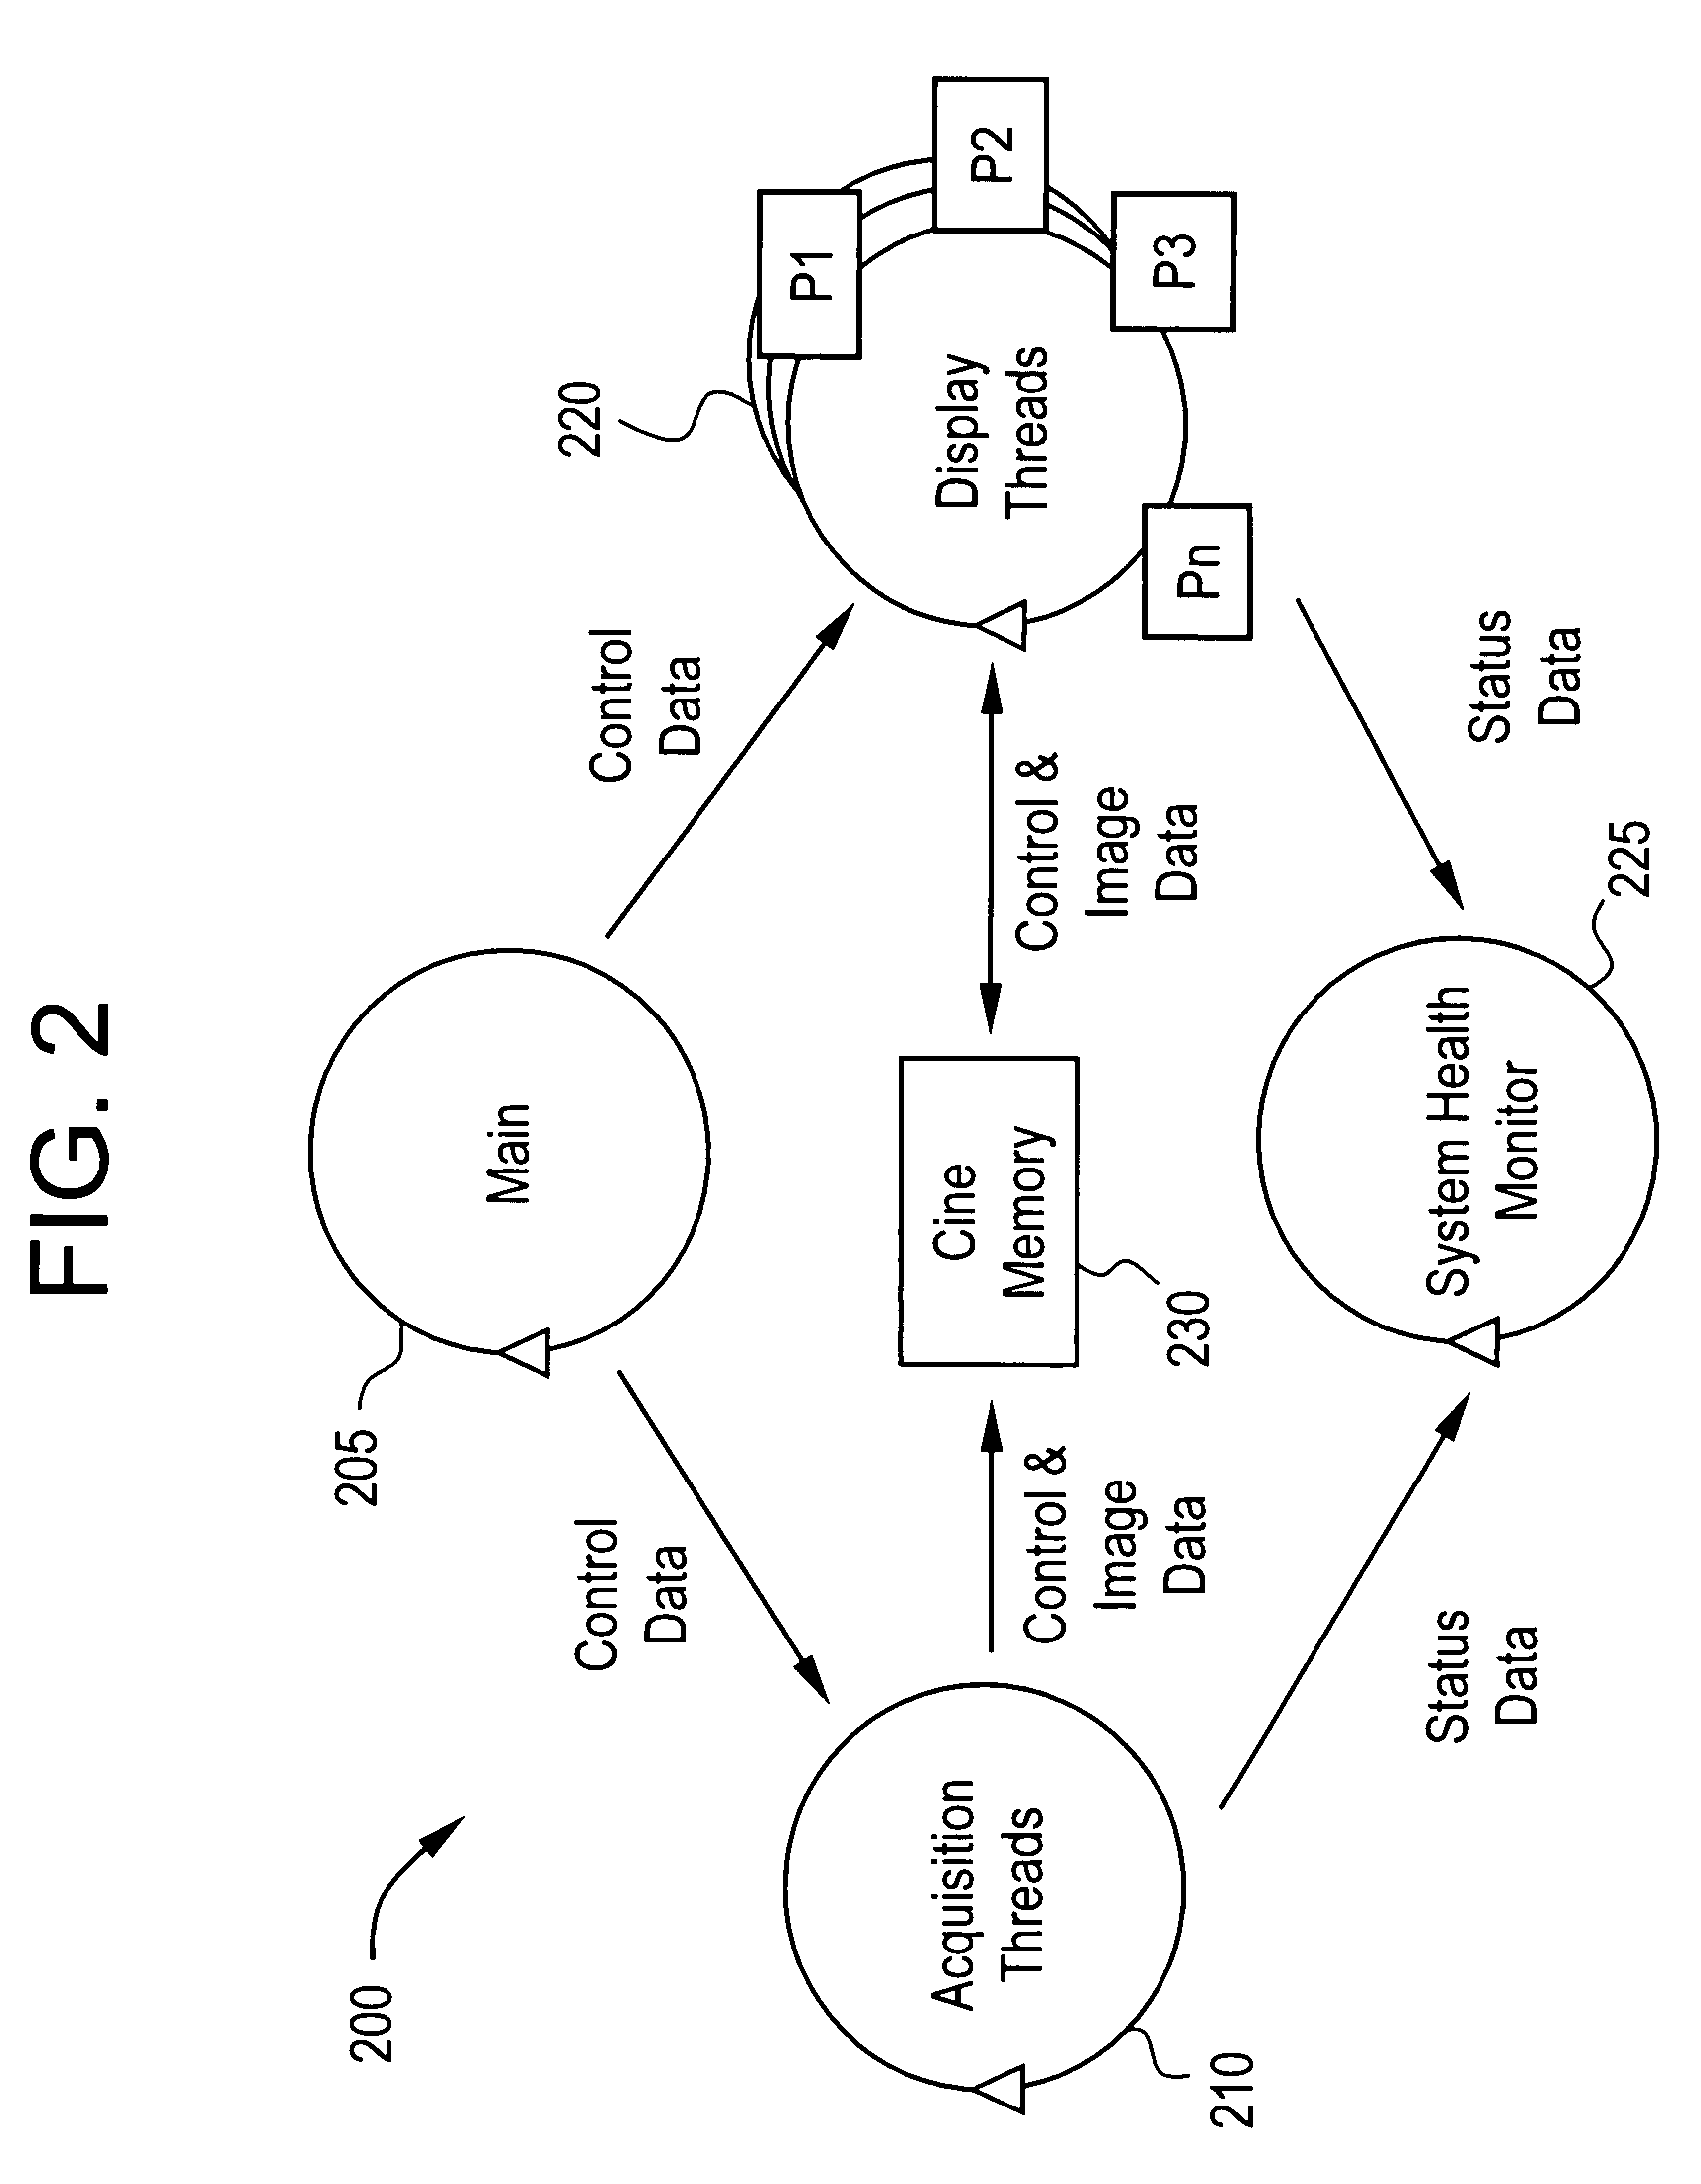 Systems and methods for proactive detection of imaging chain problems during normal system operation